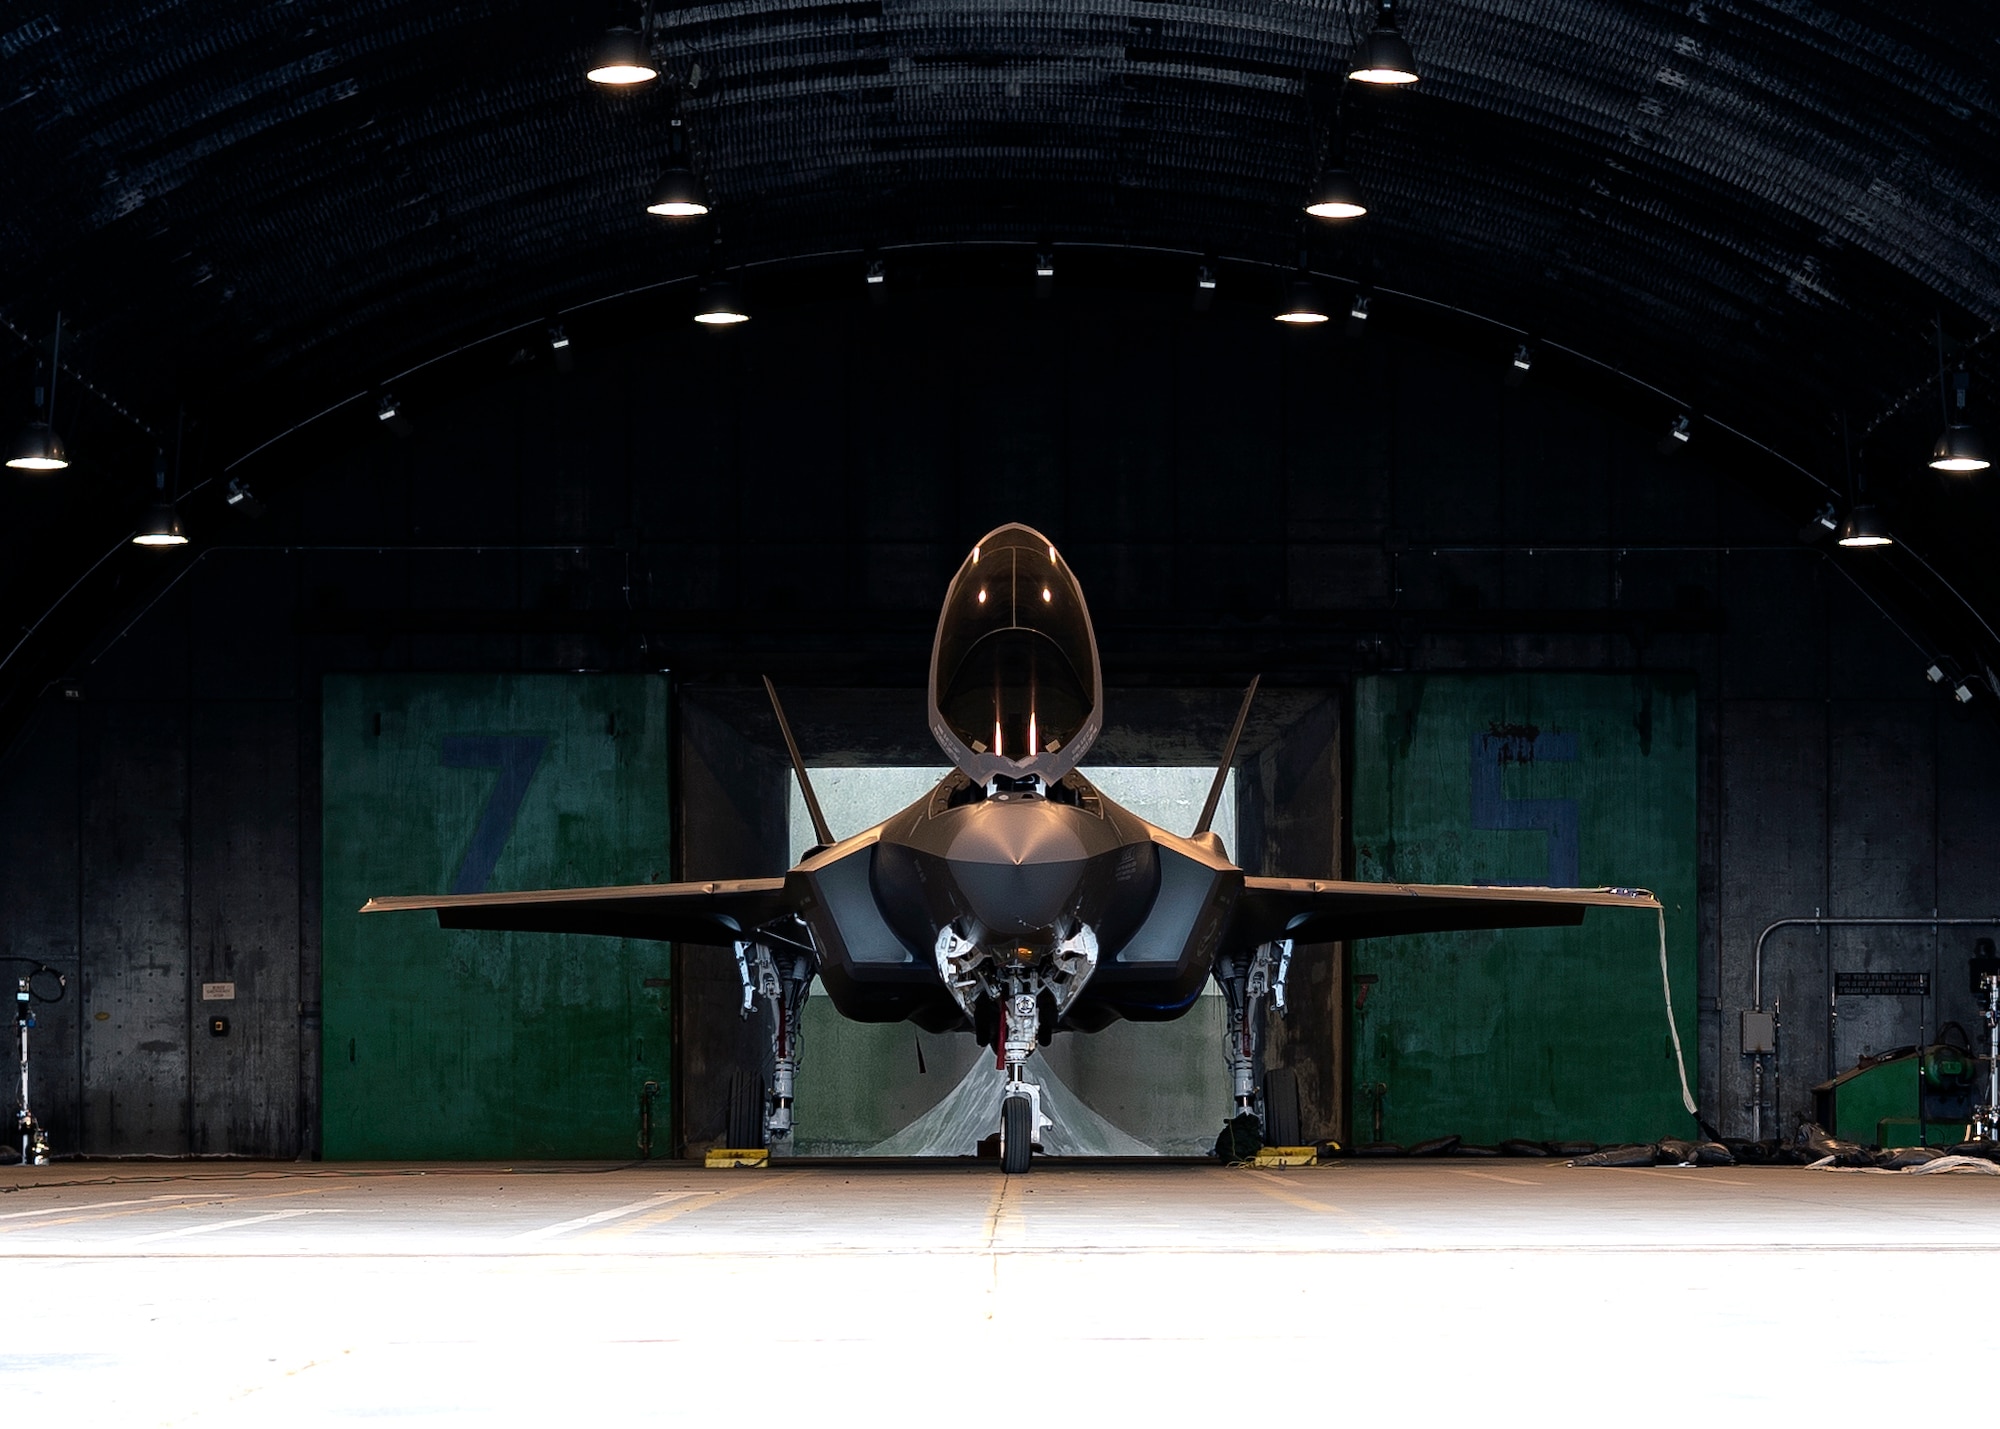 An F-35A Lightning II assigned to the 158th Fighter Wing Air, Vermont National Guard, stands static inside a protective aircraft shelter prior to the start of an acoustic and emission test at Royal Air Force Lakenheath, England, May 4, 2021. Prior to testing, acoustic sensors are affixed to the skin of the aircraft in structurally critical locations where acoustic pressure levels cannot be exceeded. (U.S. Air Force photo by Senior Airman Jessi Monte)